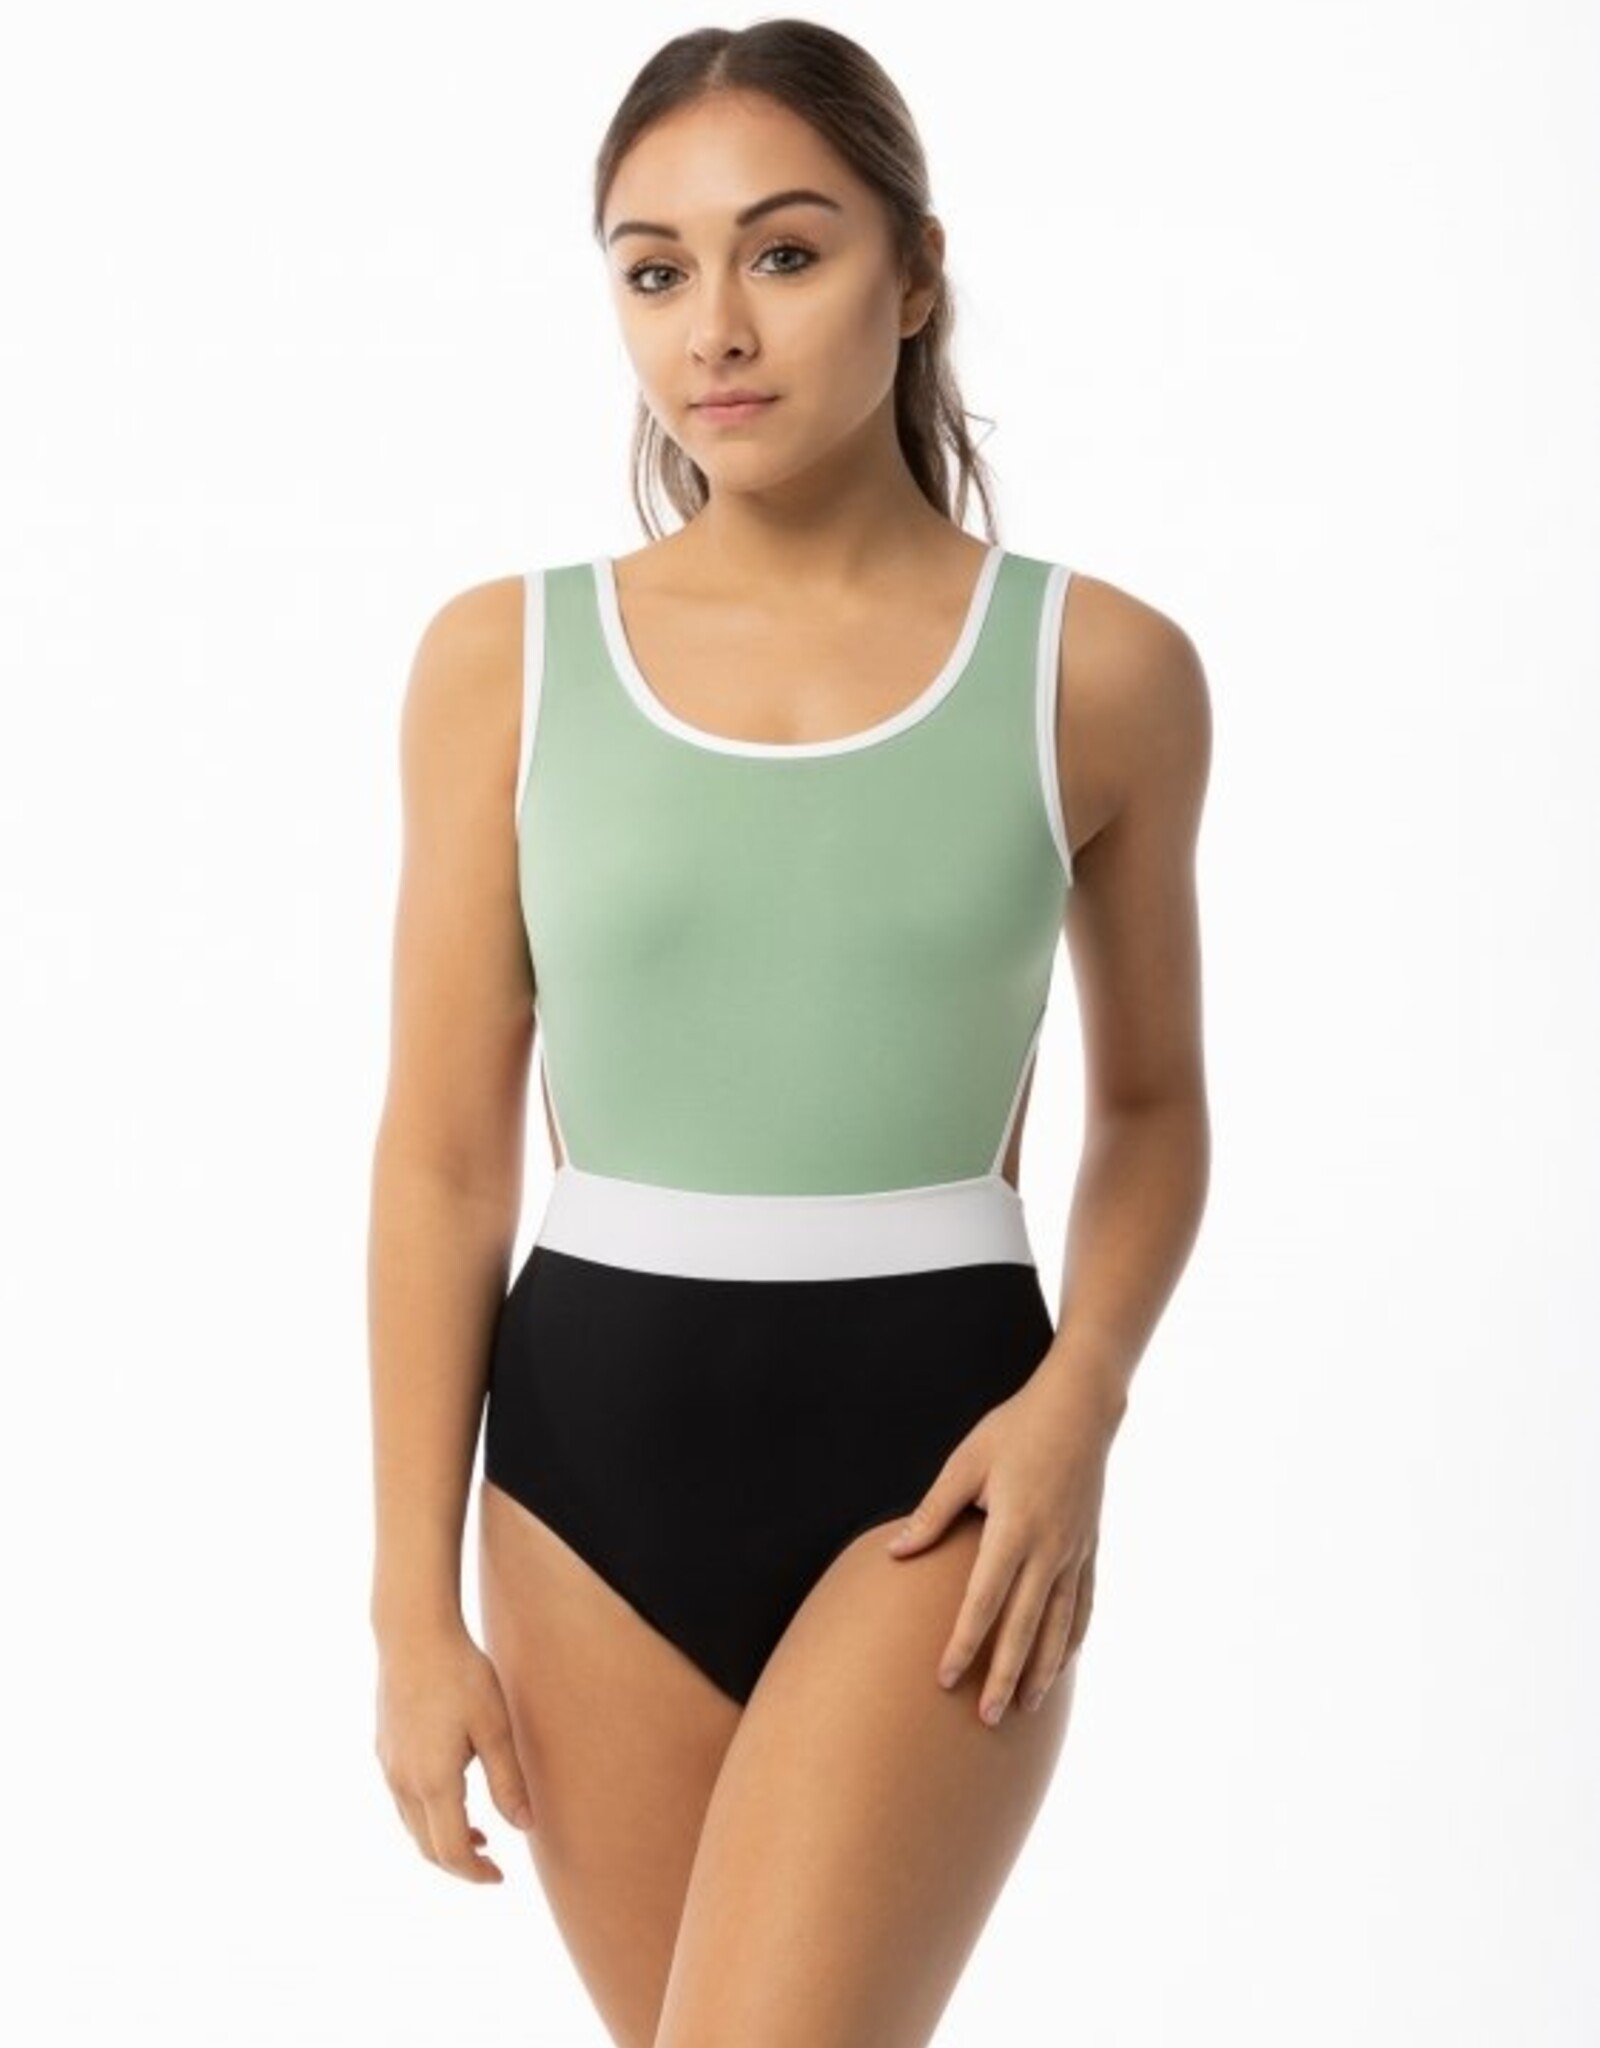 Suffolk ladies' 2546A Chromatic Scoop Front Tank Adult Leotard